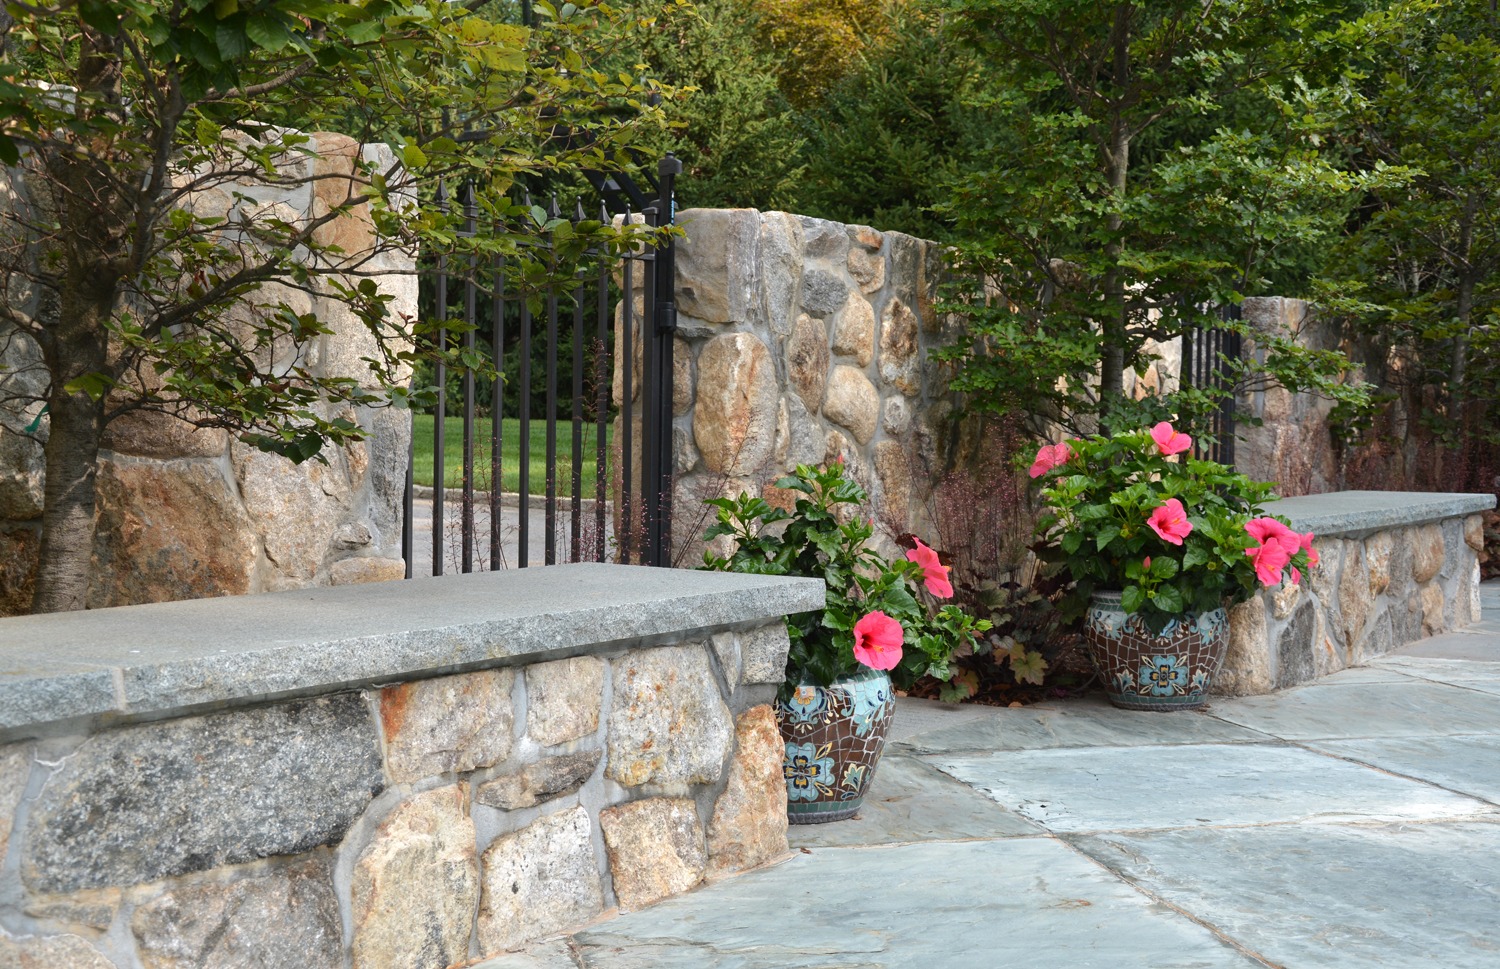 A stone wall with integrated benches borders a walkway, adorned with potted pink flowers, behind a metal gate, surrounded by greenery and trees.